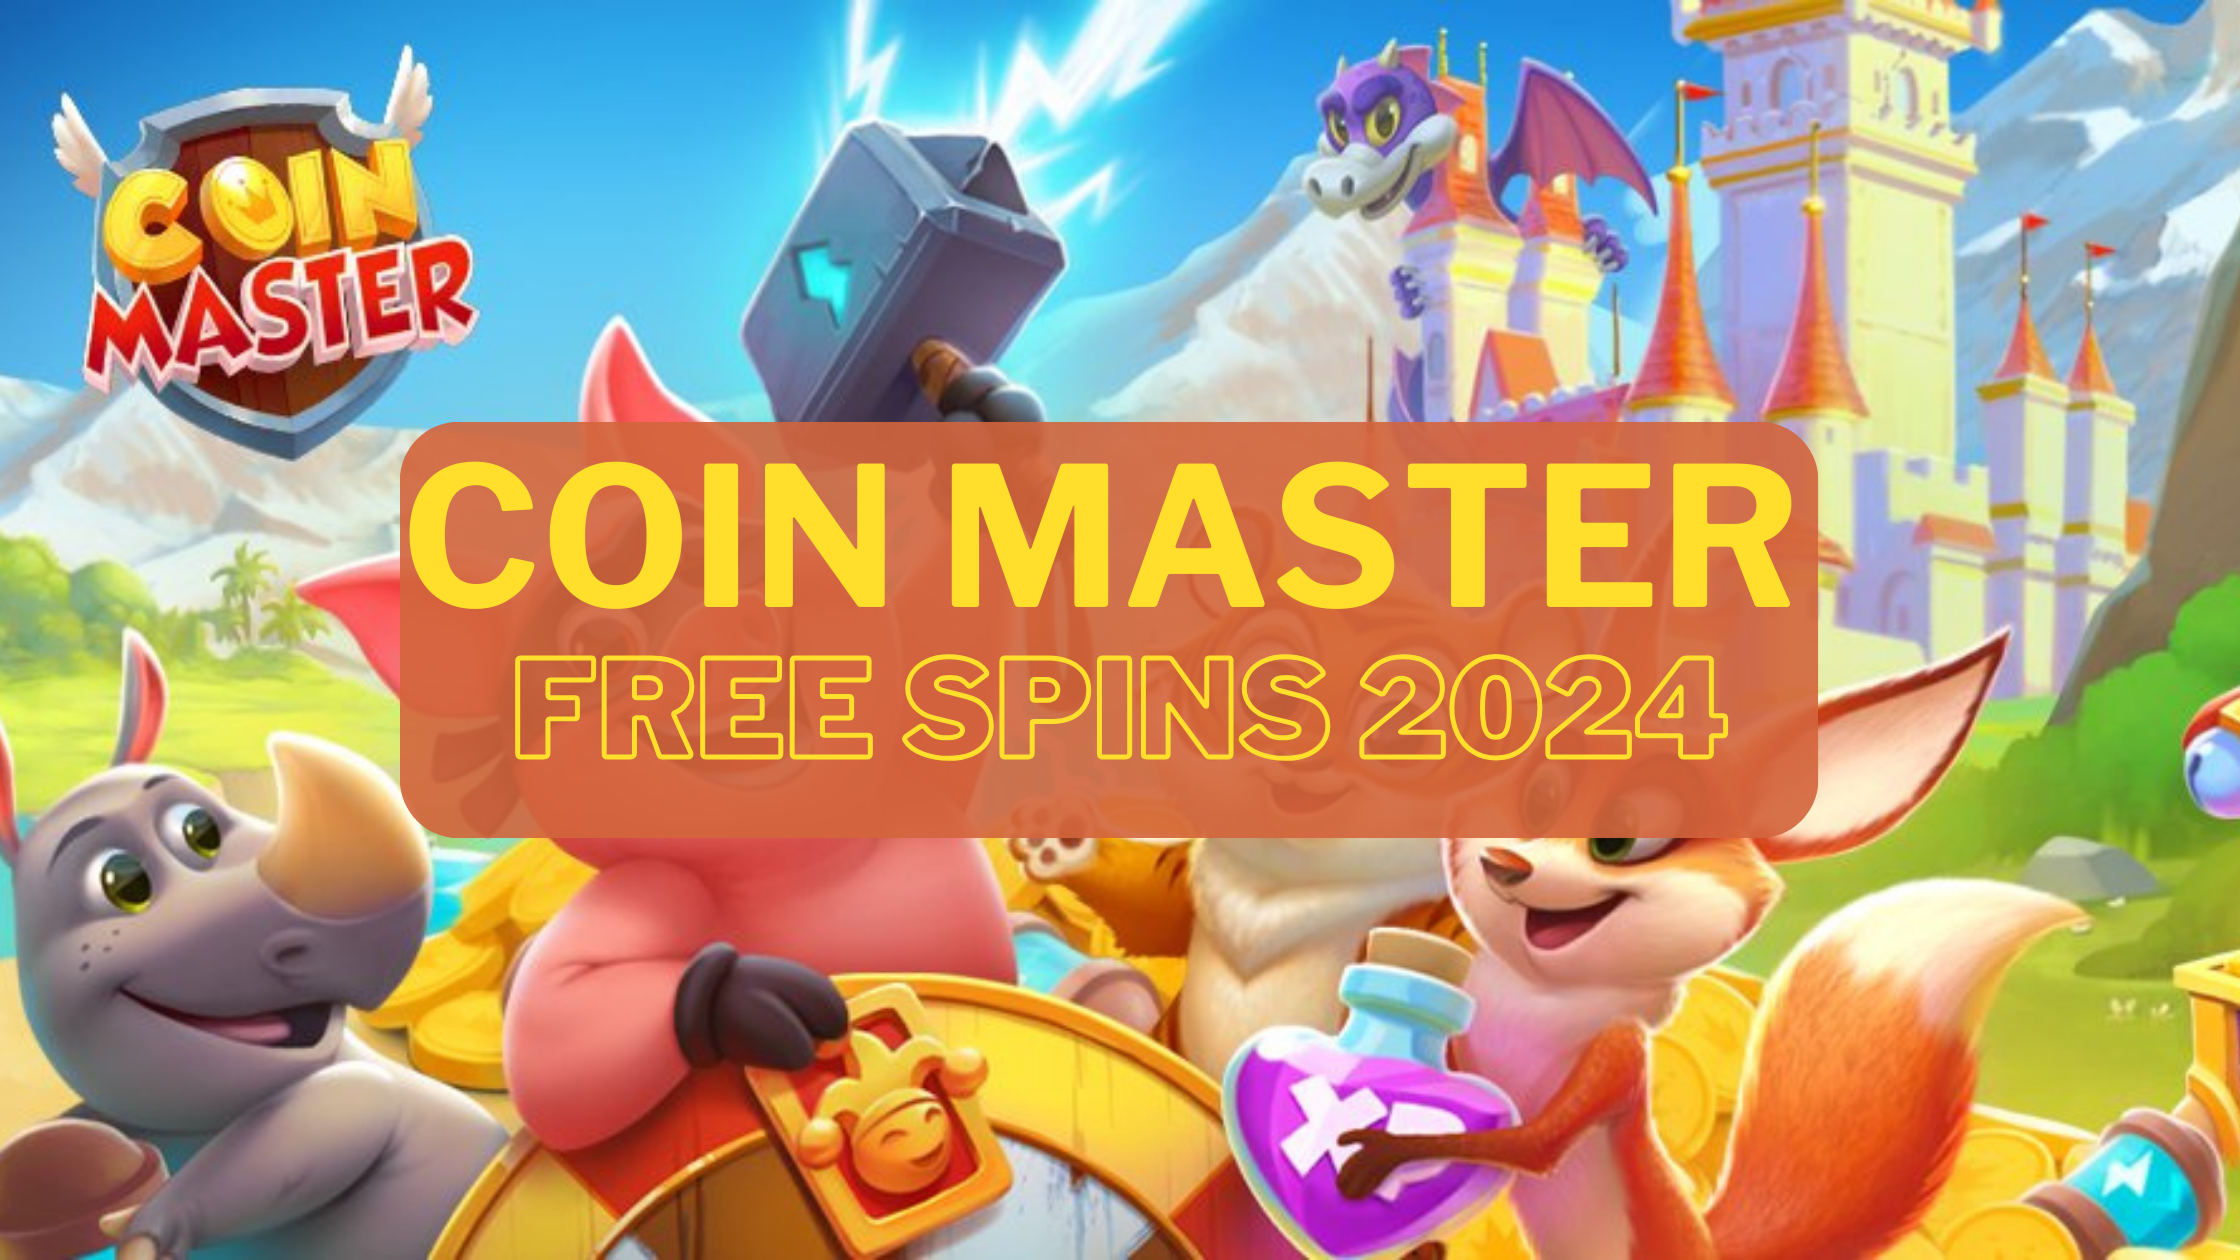 Coin Master Free Spins 2024 - Free Coin Master Spins January 2024